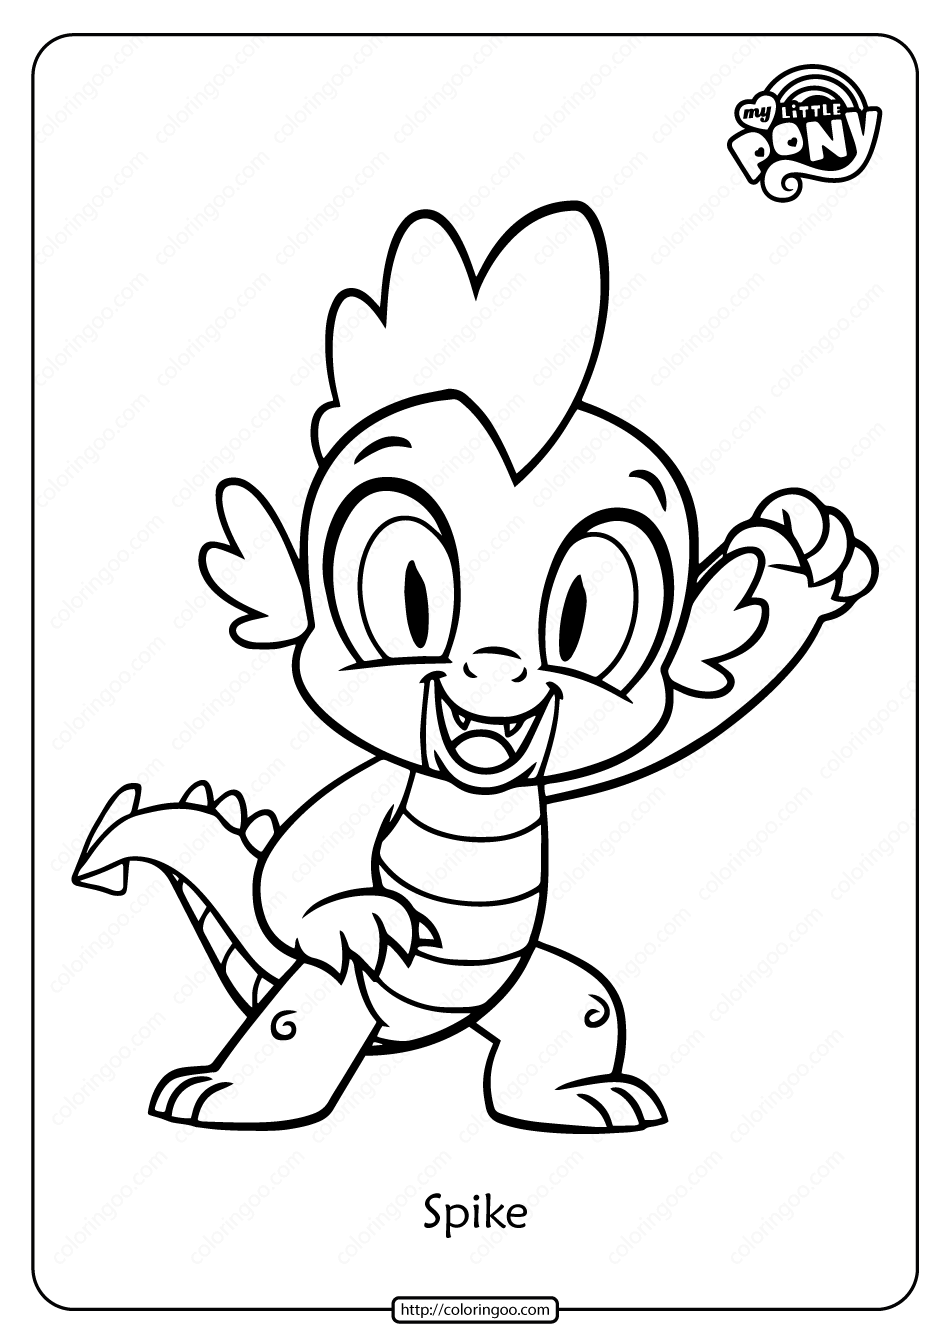 Printable My Little Pony Spike Pdf Coloring Page | My little pony coloring, My  little pony printable, Little pony